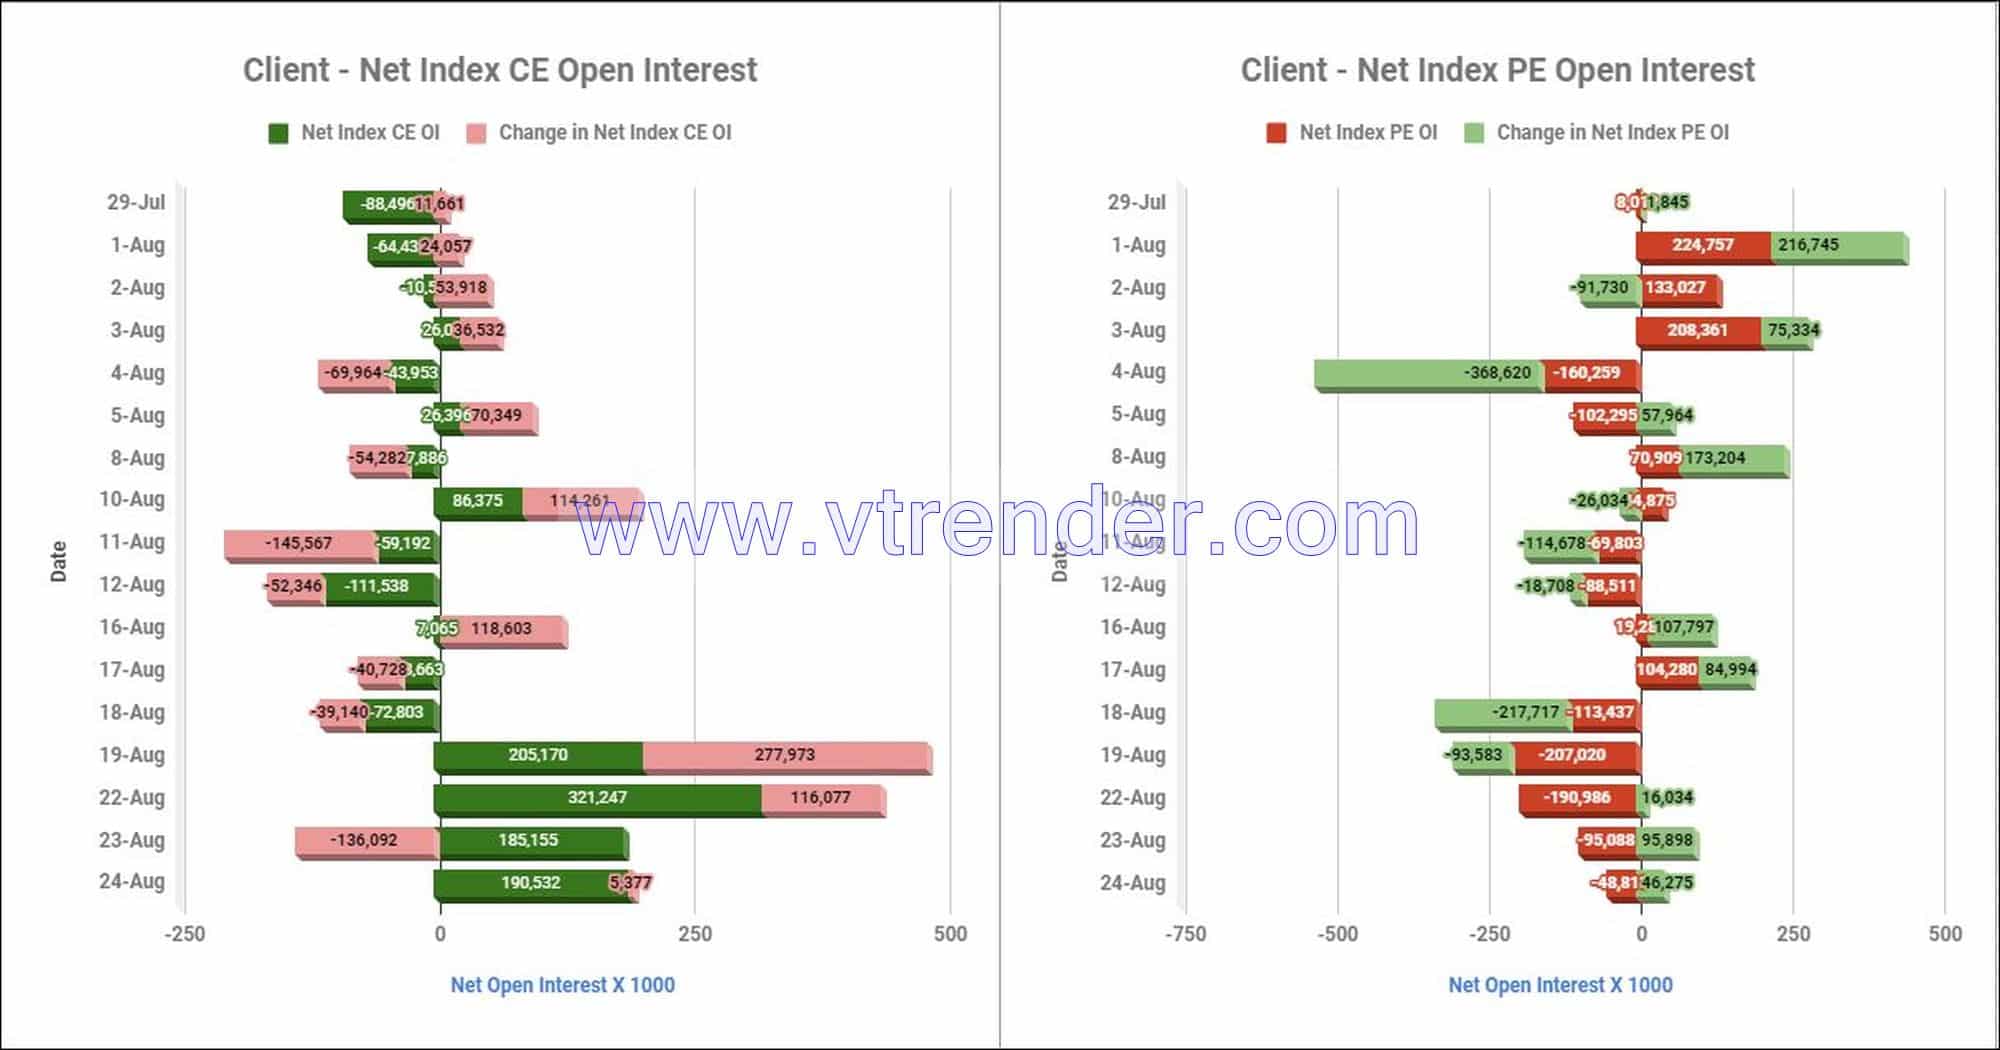 Clientinop24Aug Participantwise Net Open Interest And Net Equity Investments – 24Th Aug 2022 Client, Equity, Fii, Index Futures, Index Options, Open Interest, Prop